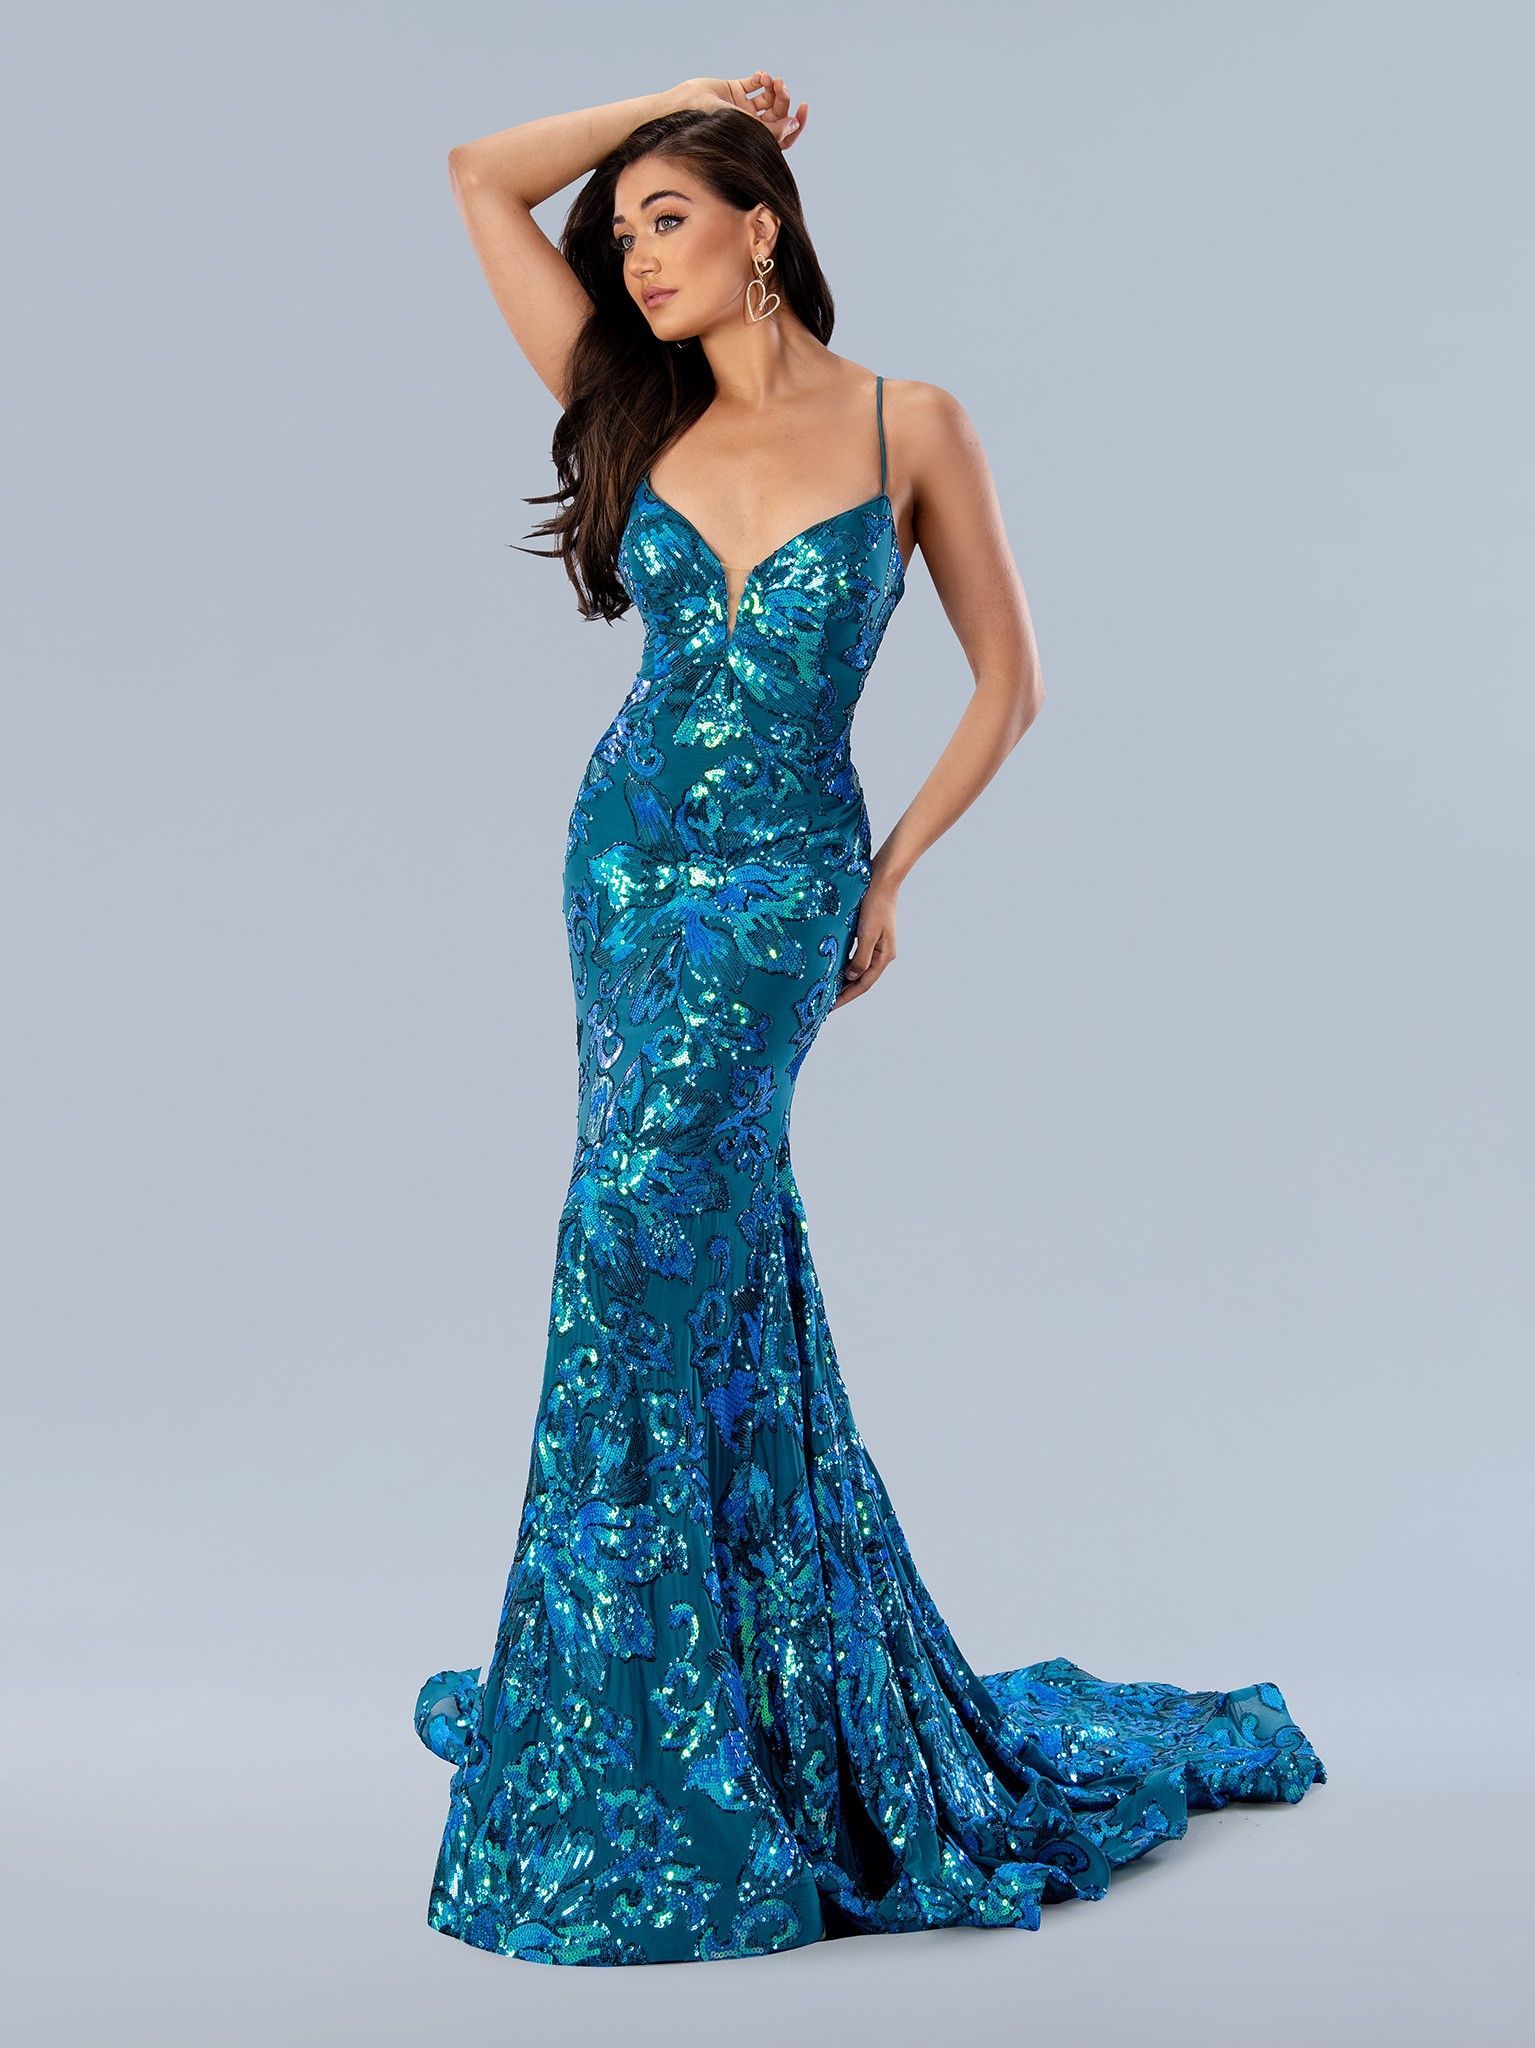 Tampa Florida Prom Boutique/Shop, Prom Gowns, Designer Prom dresses, affordable prom dresses, Prom Dress Store Near Me, Boutiques Near Me, Nikki's Glitz and Glam, Welsey Chapel, Palm Harbor, Nikki's, glitz and glam, maria's bridal, maria's, marias, marias bridal, New port richey prom store, port richey prom store, tampa prom store, palm harbor prom store, dress store, wesley chapel prom store, wiregrass prom store, Prom Shop Near Me, prom dresses near me, prom dress shops near me, hoco dresses, jovani, prom dresses 2021, homecoming dress stores, prom dress stores, prom dresses stores, homecoming dresses 2021, homecoming dress stores near me, formal dress shops near me, where to buy prom dresses near me, glitzy boutique, cinderella dress, dress boutiques, prom dresses online, evening dresses near me, prom shops near me, bridal store near me, graduation dresses near me, prom store, places to get prom dresses near me, prom dresses 2020, pageant dresses near me, prom stores, ellie wilde, glitzy glam boutique, glitz, prom dress boutiques near me, prom dress places near me, prom places near me, where to buy prom dresses, prom dress shops, glitzy girl boutique reviews, prom dresses 2021 near me, gown store near me, formal dress rental near me, prom dresses shops near me, prom dress shop near me, gala dresses near me, jovani 48609 available, red prom dresses 2019, sexy prom dresses 2019, glamour boutique
best places to buy prom dresses
places that sell prom dresses near me
prom dress boutiques, 